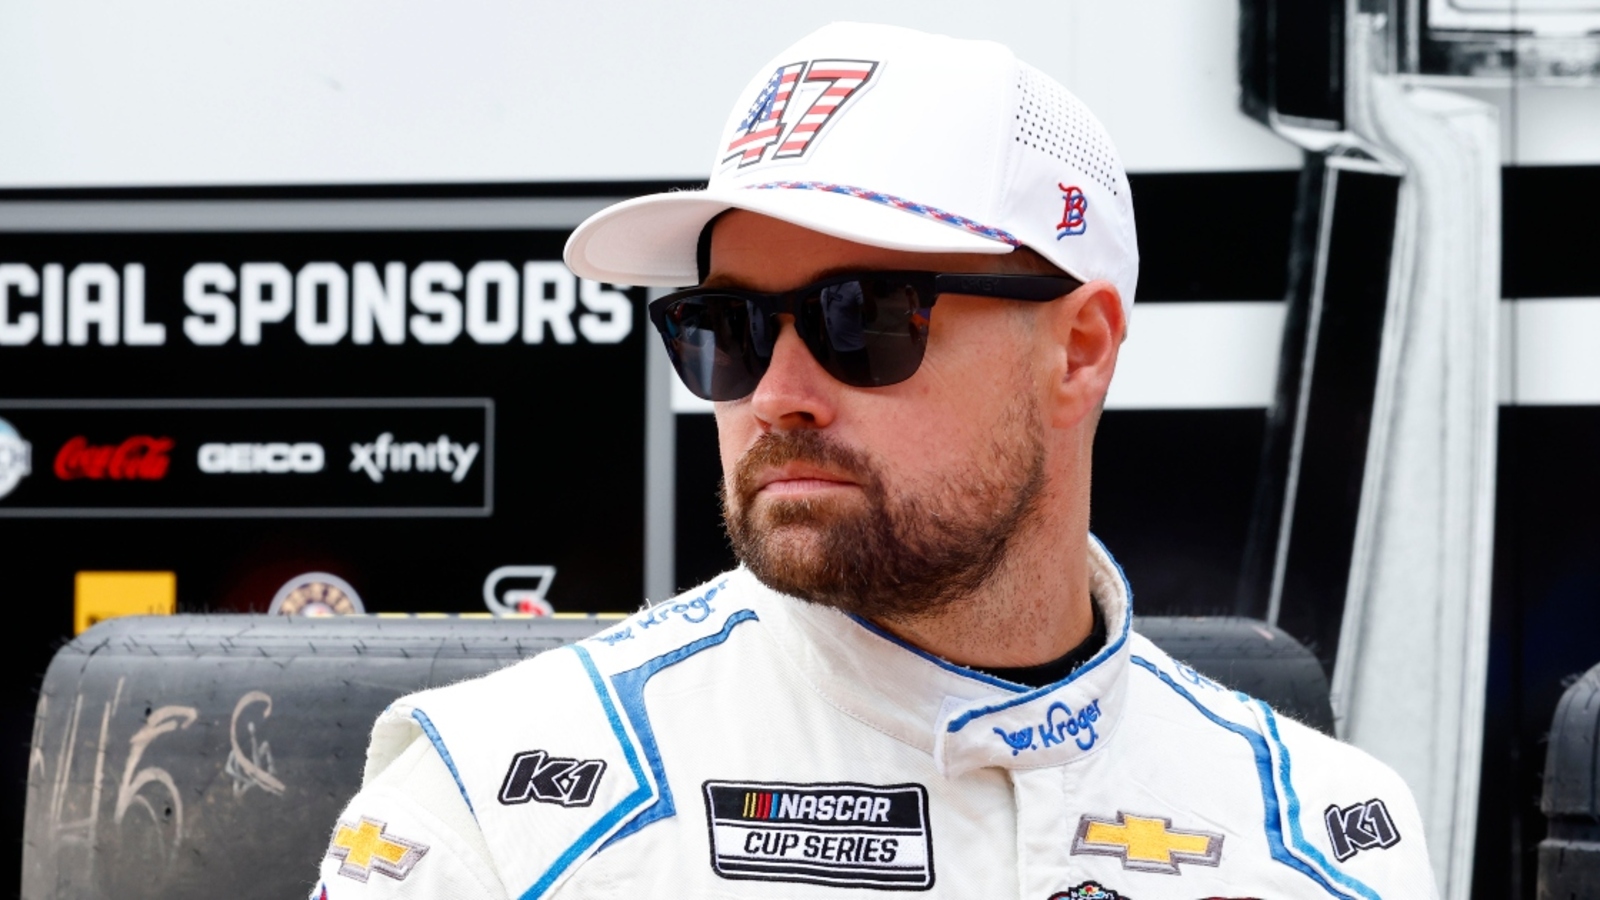 Ricky Stenhouse Jr. on parking in Kyle Busch pit box: ‘It was kind of spur of the moment’